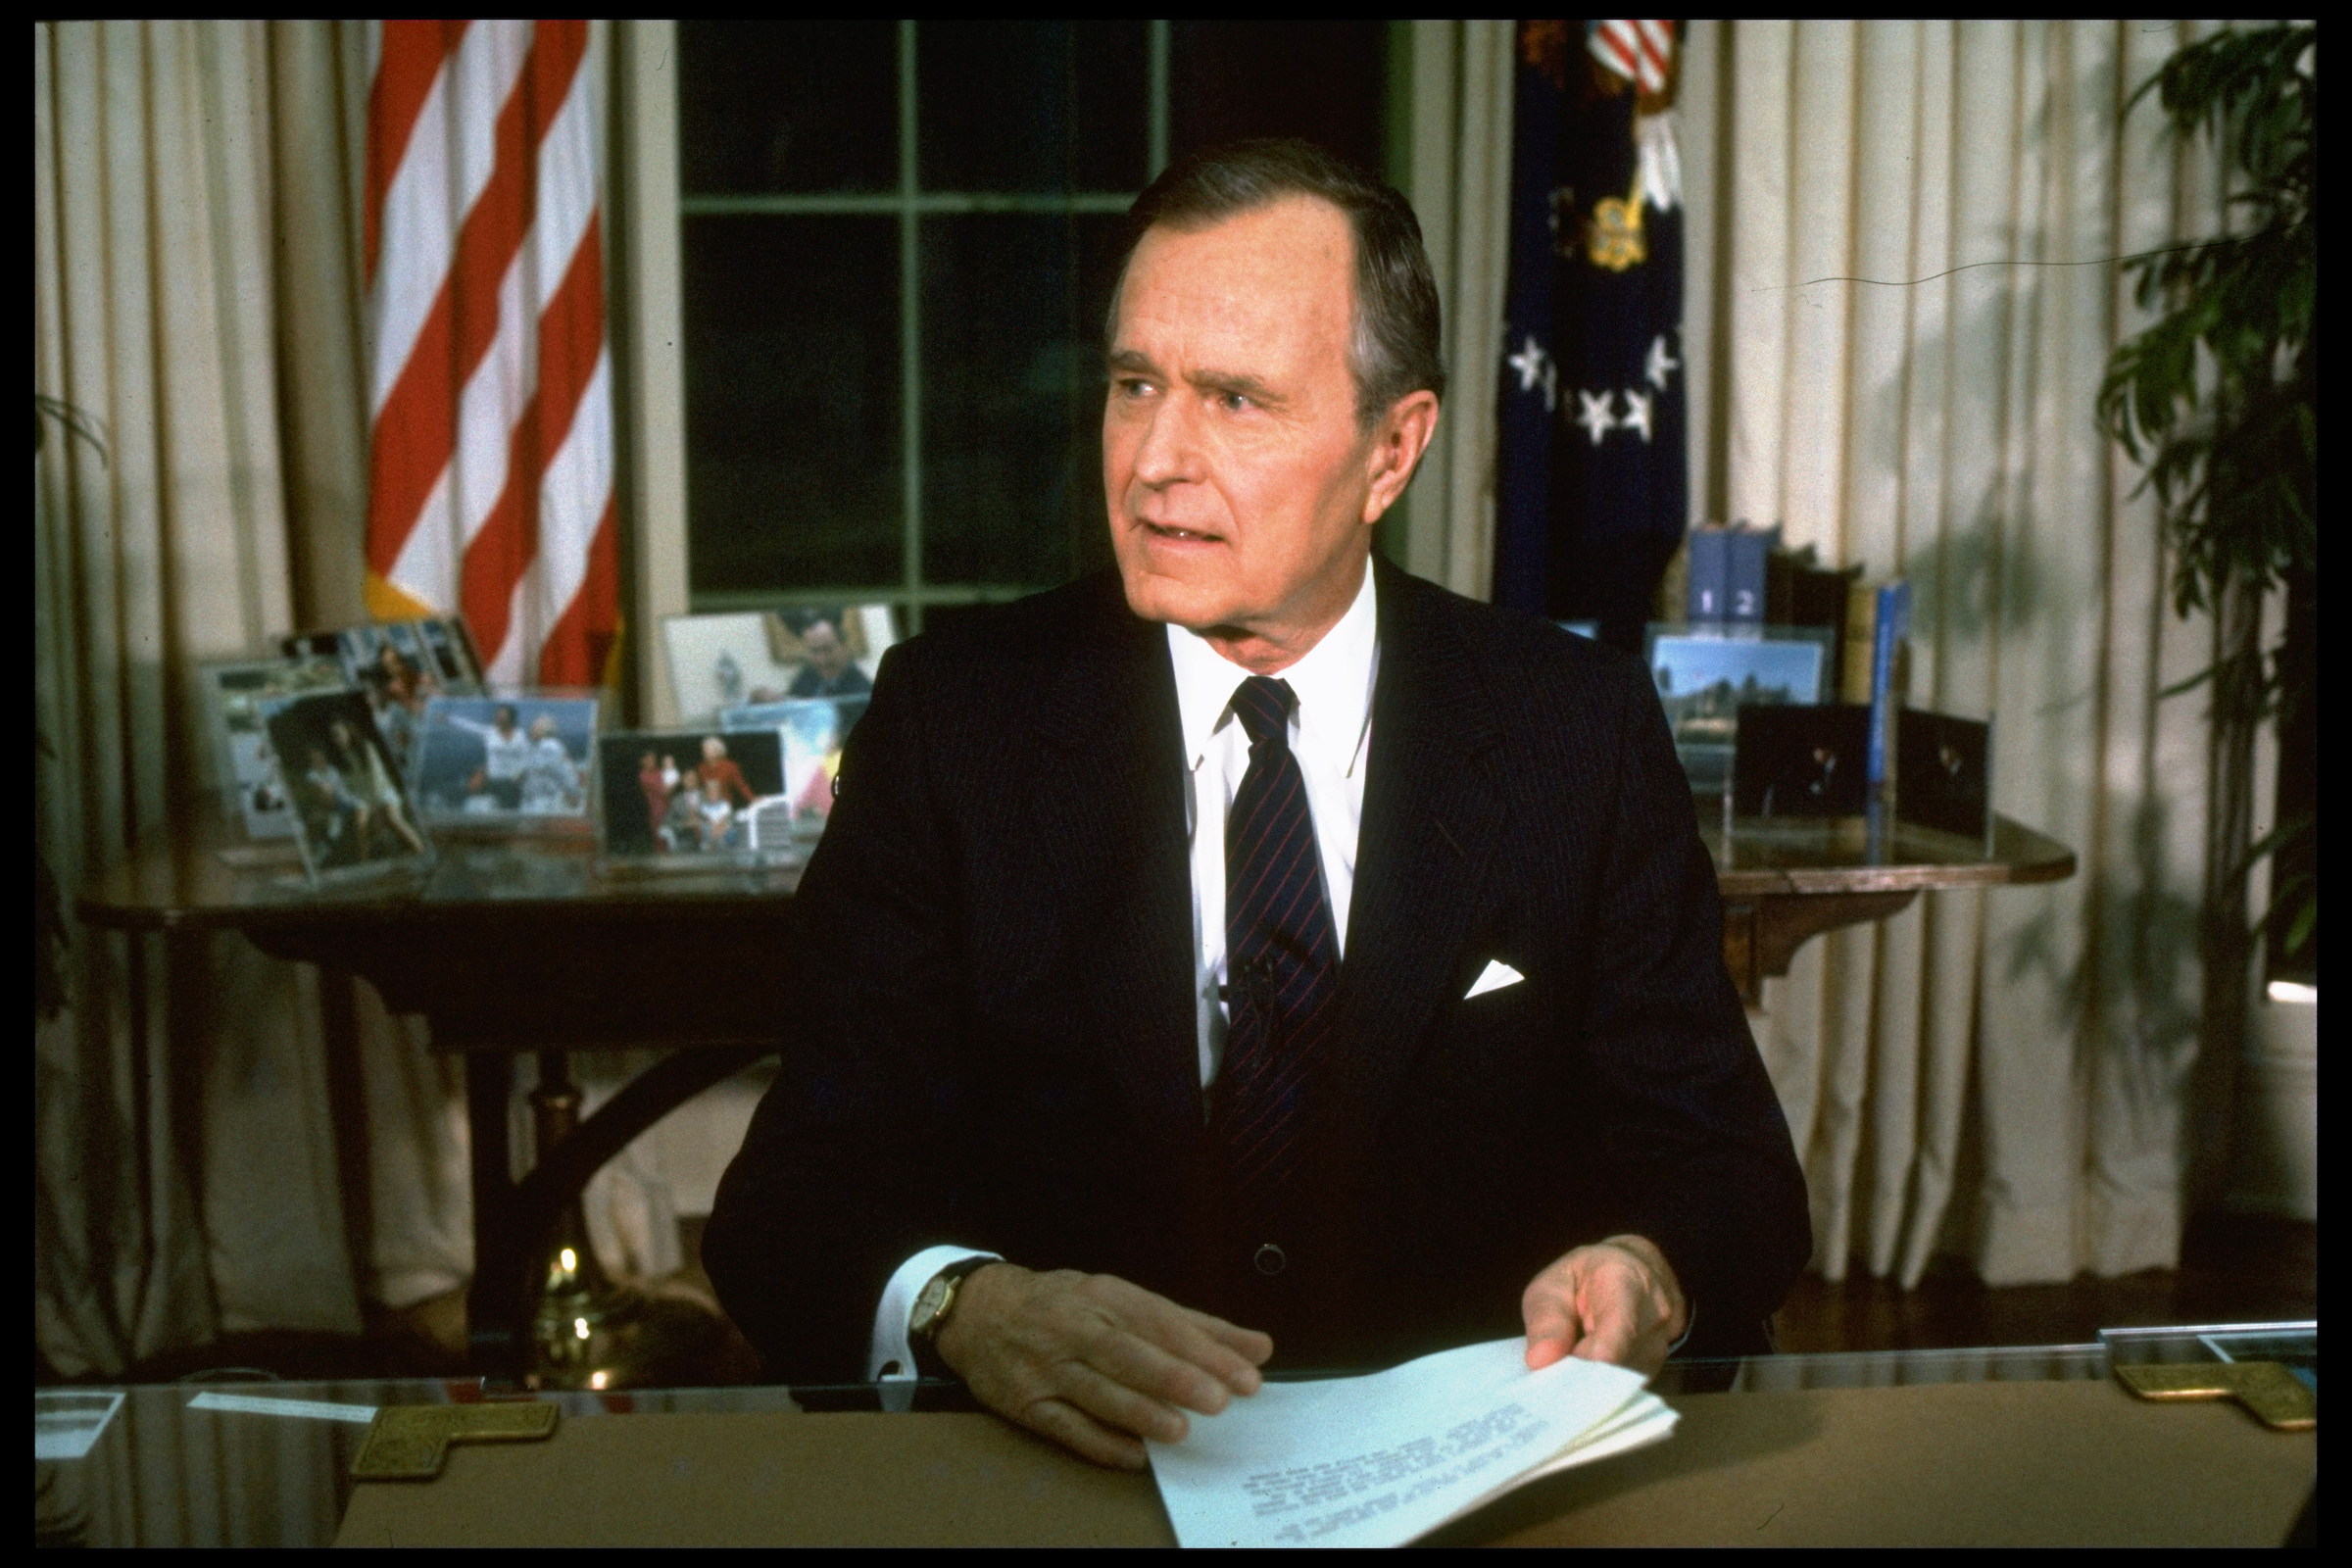 President George H.W. Bush addresses the nation from the Oval Office about the start of Operation Desert Storm. (Diana Walker&mdash;Time &amp; Life Pictures/Getty Image)